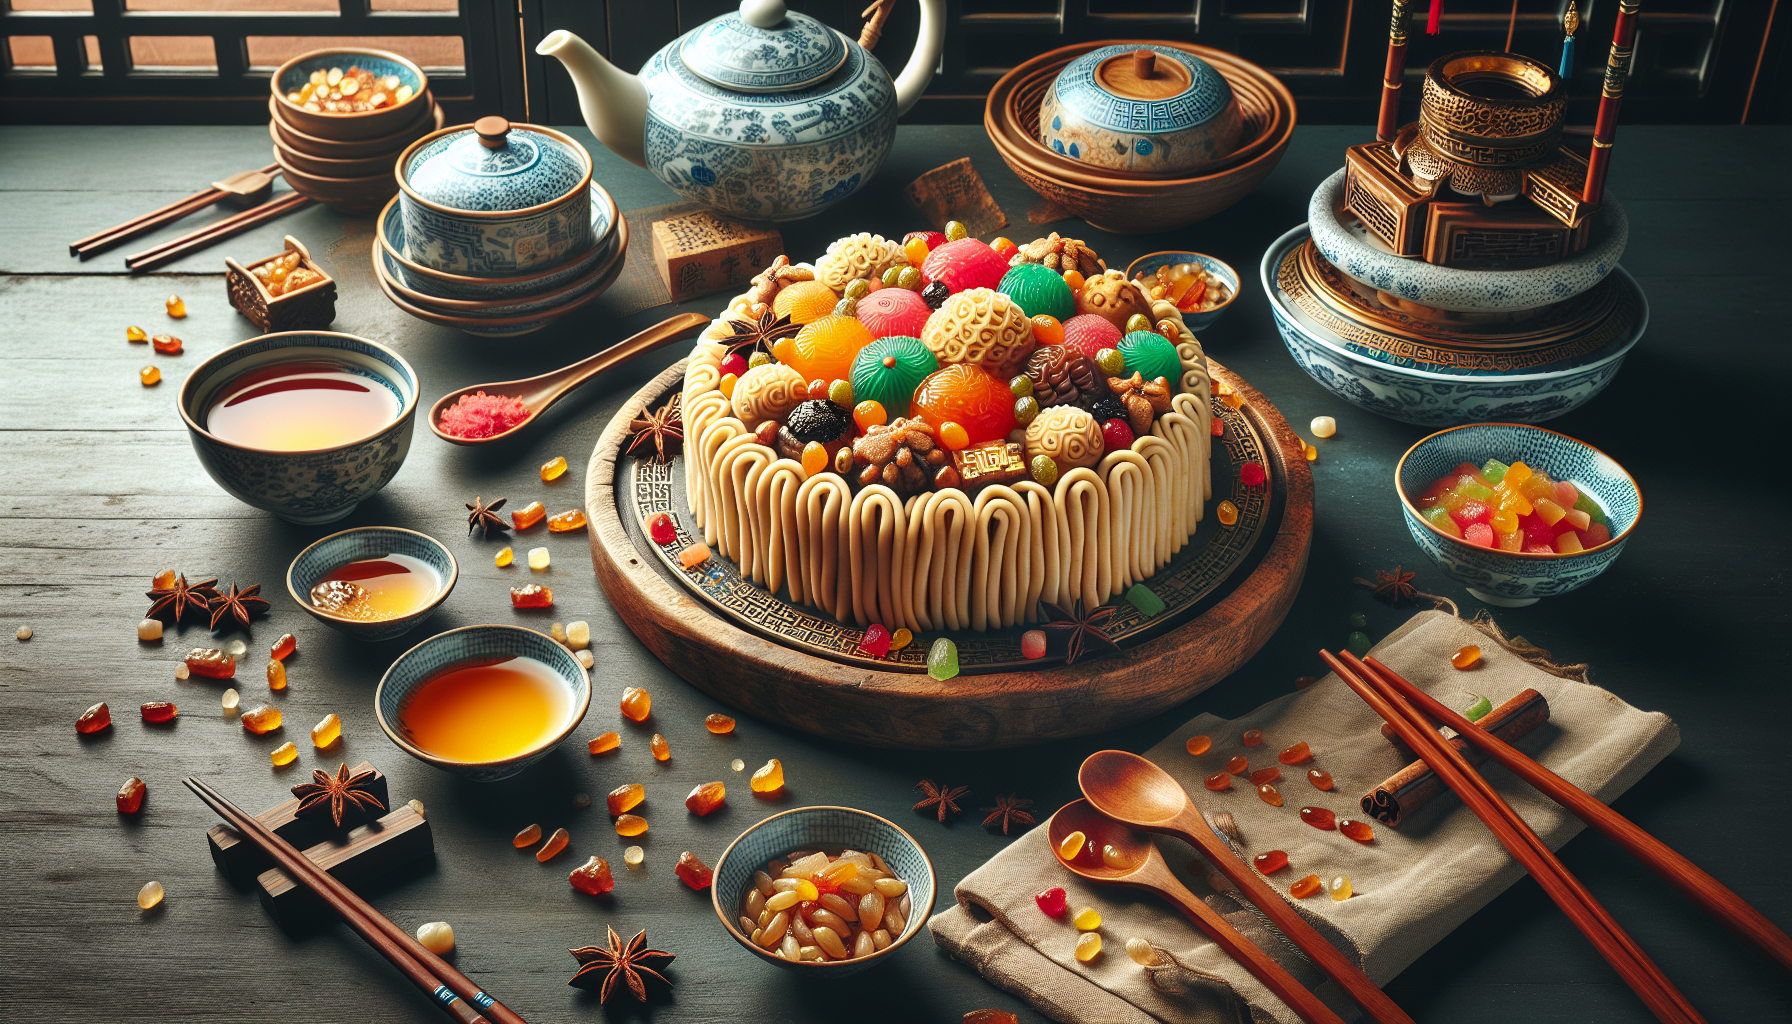 Can You Suggest A Chinese Dessert That’s Unique And Not Commonly Known?